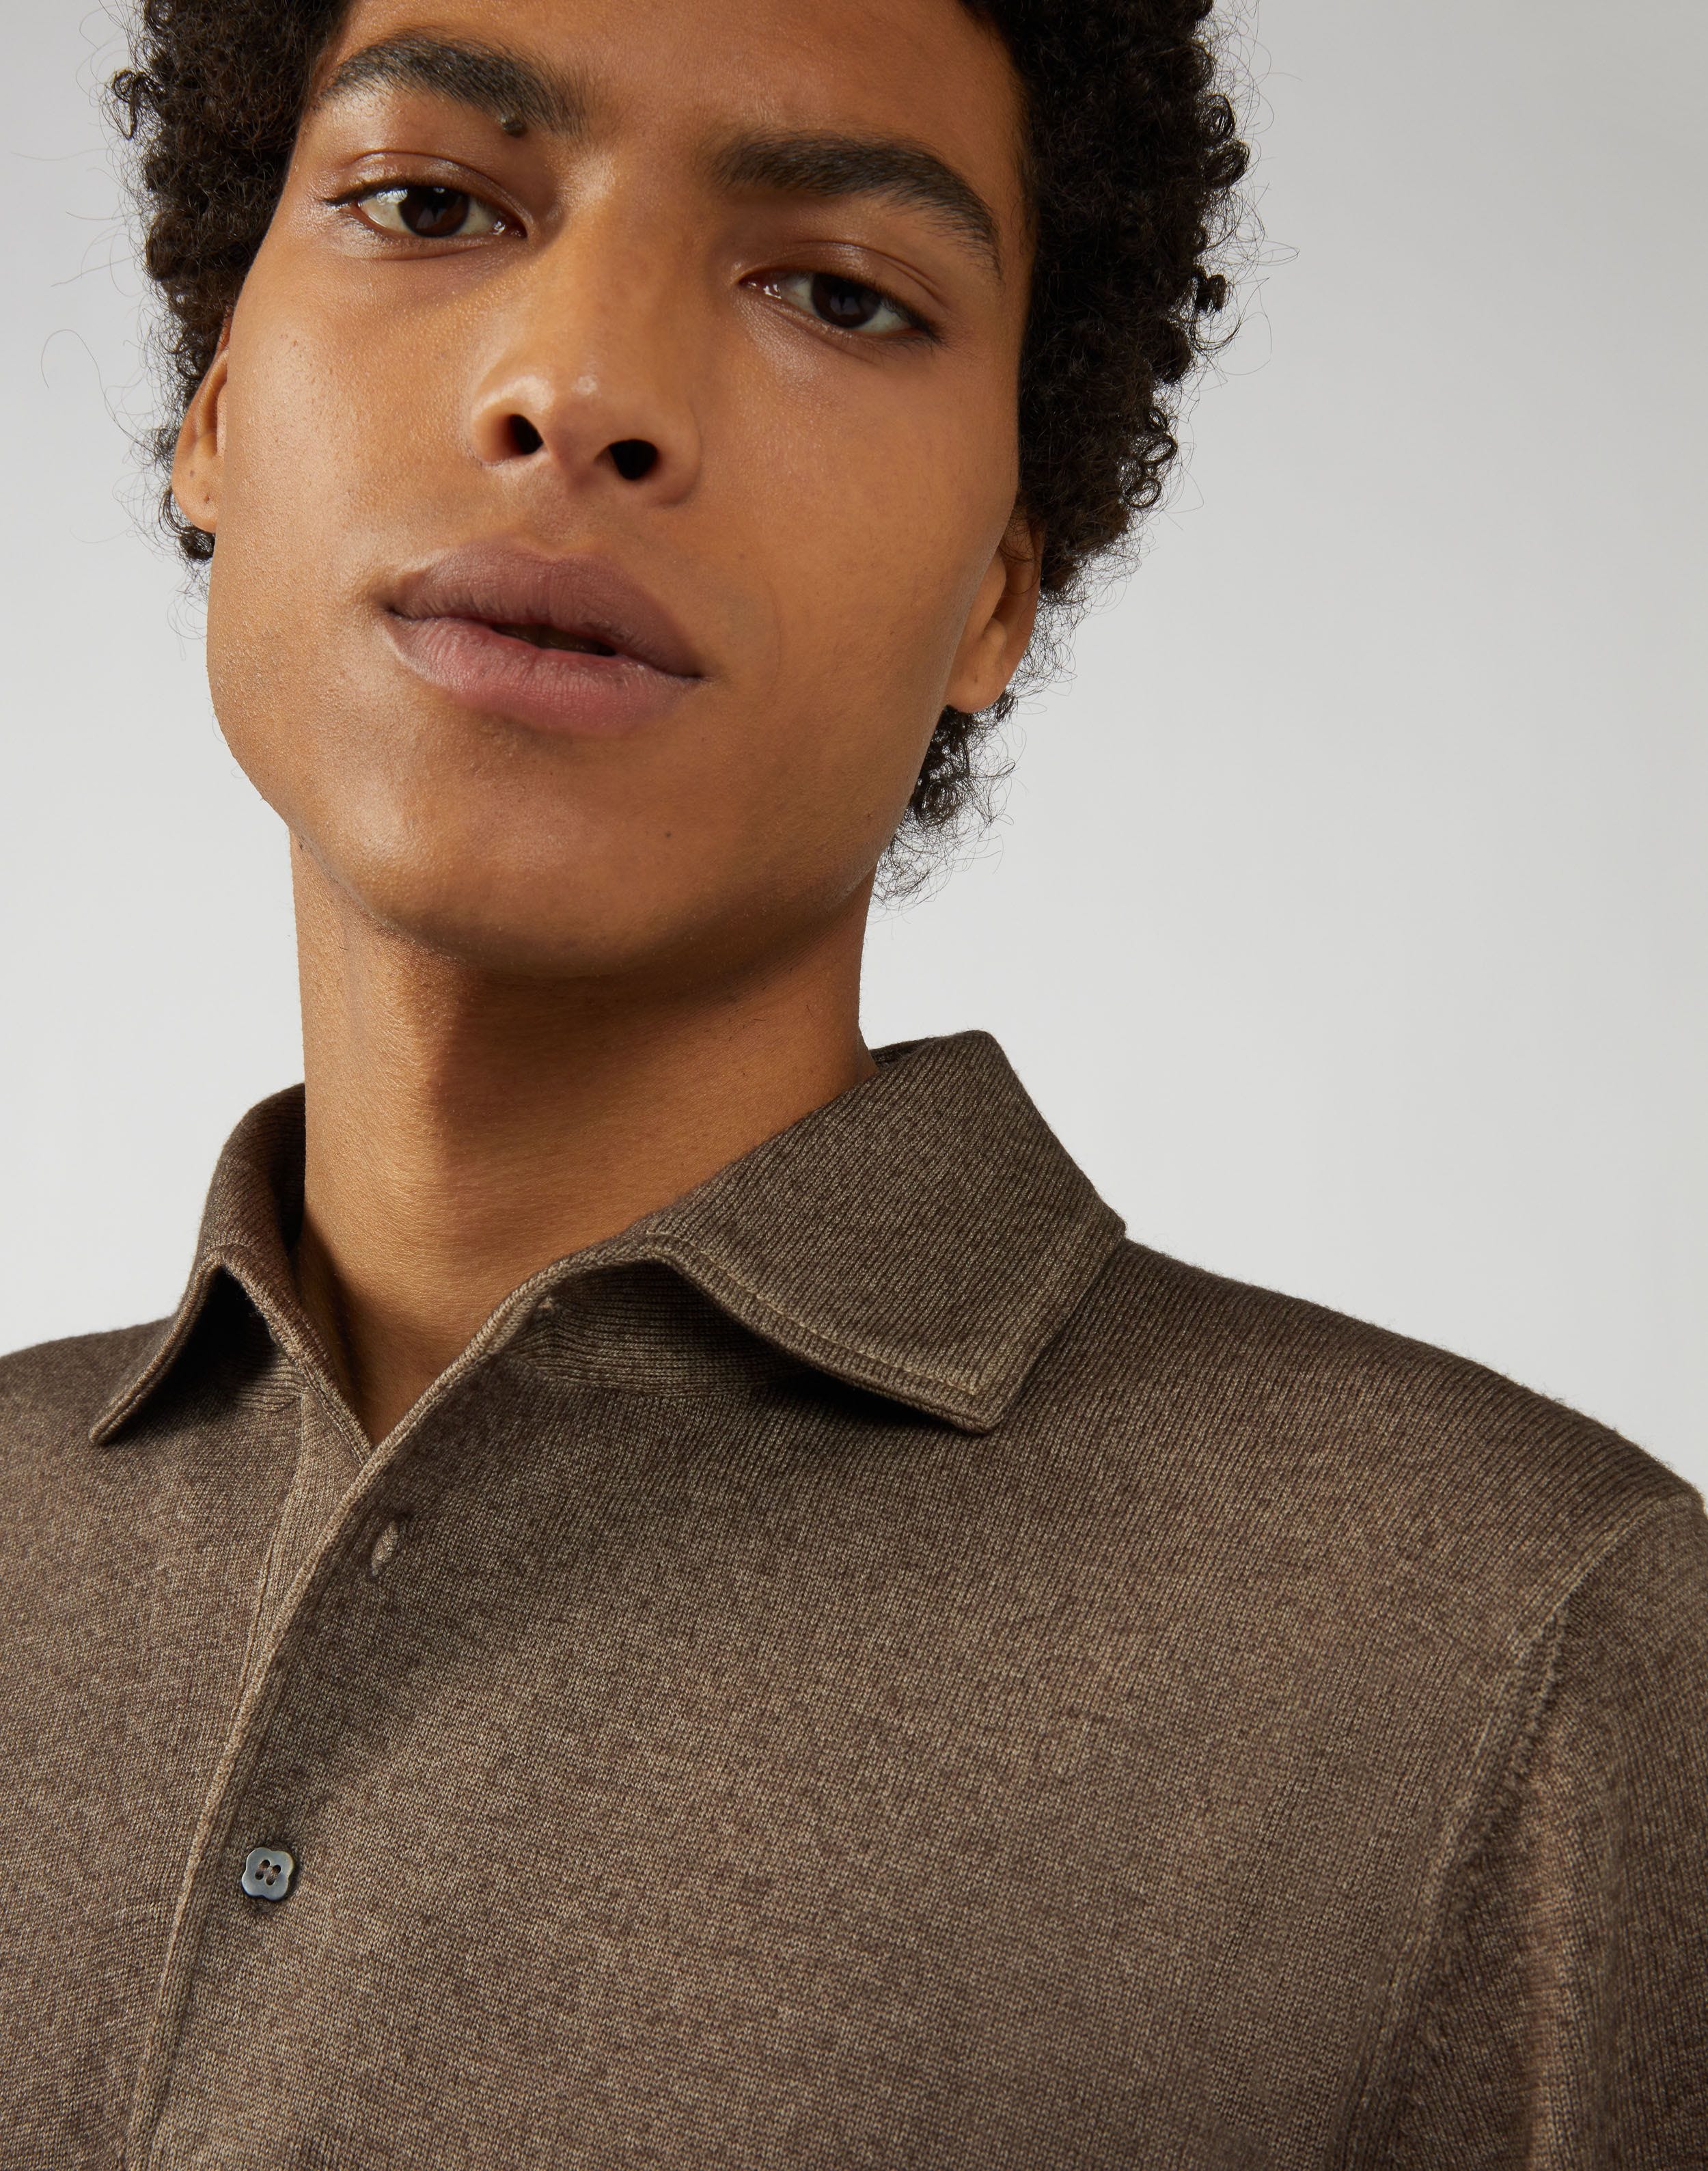 Hazel-brown polo shirt in worsted wool